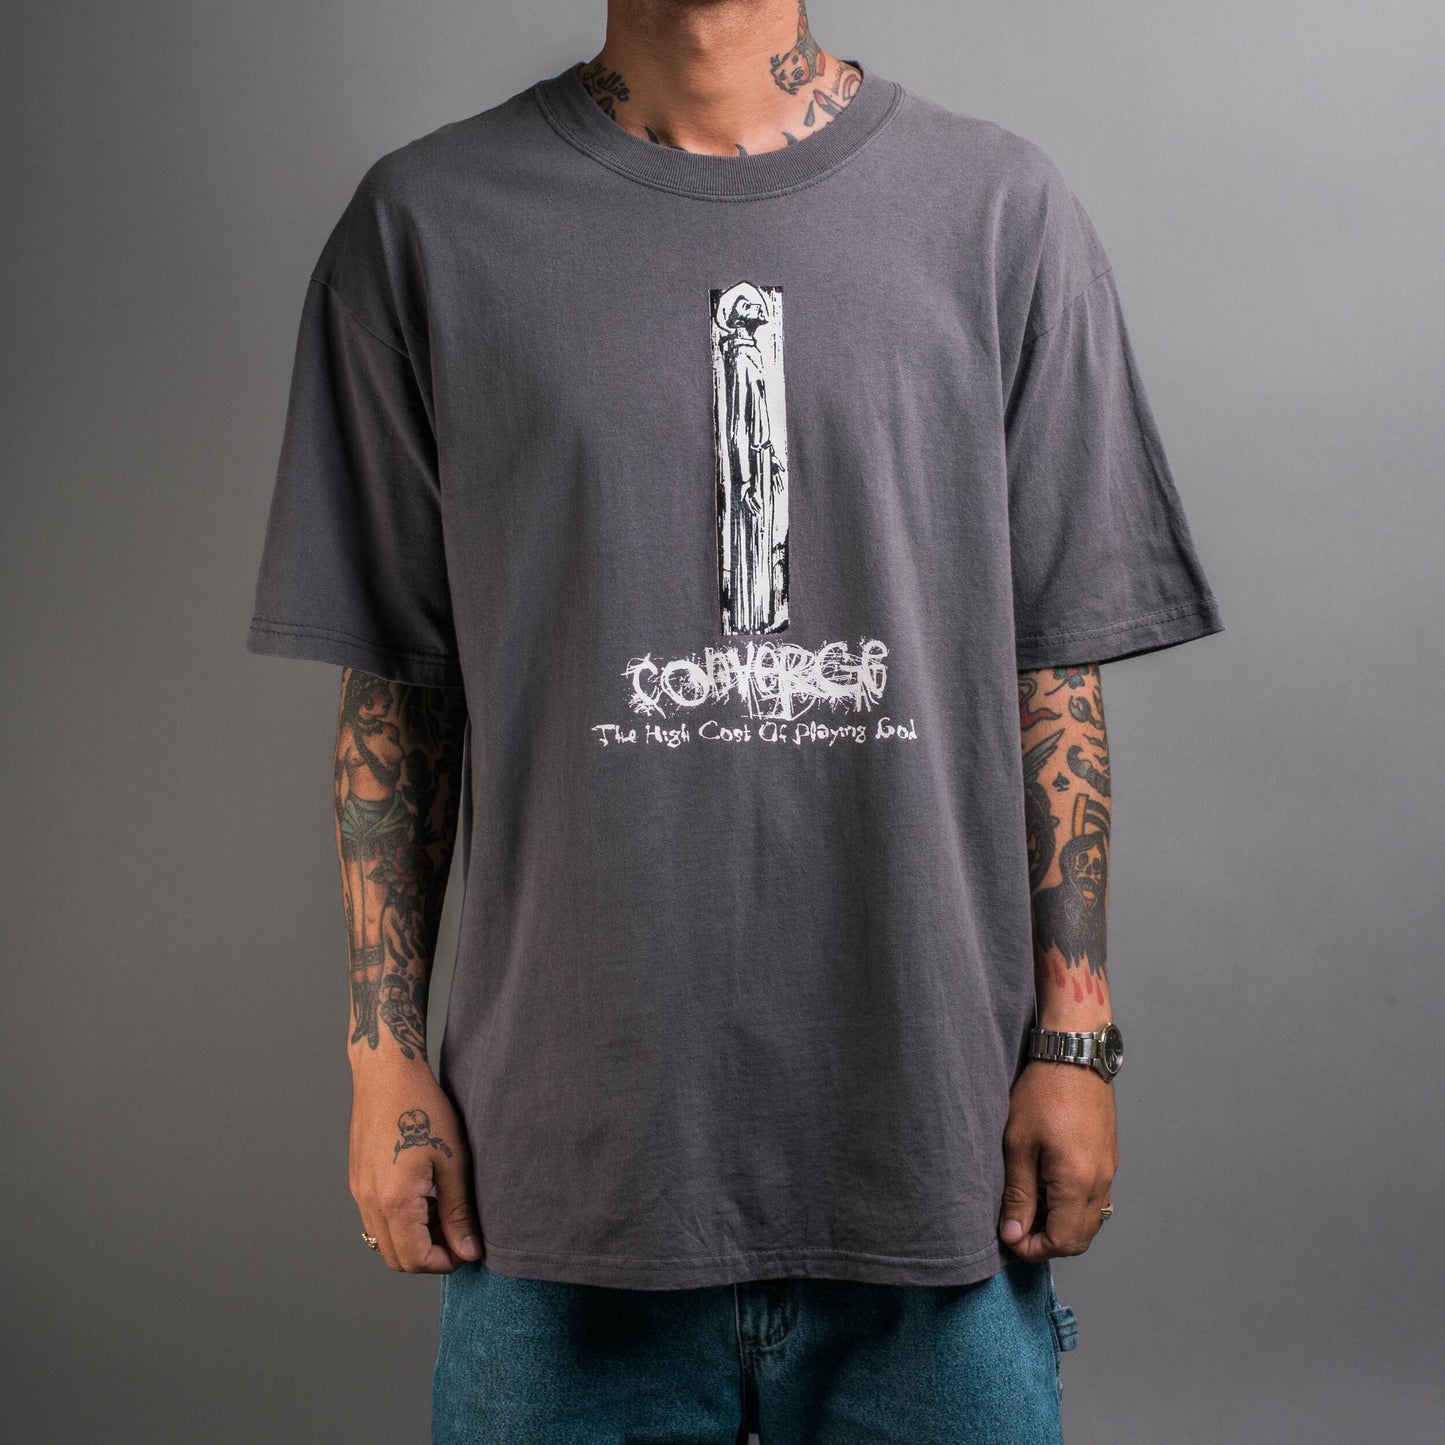 Vintage 90’s Converge The High Cost Of Playing God T-Shirt